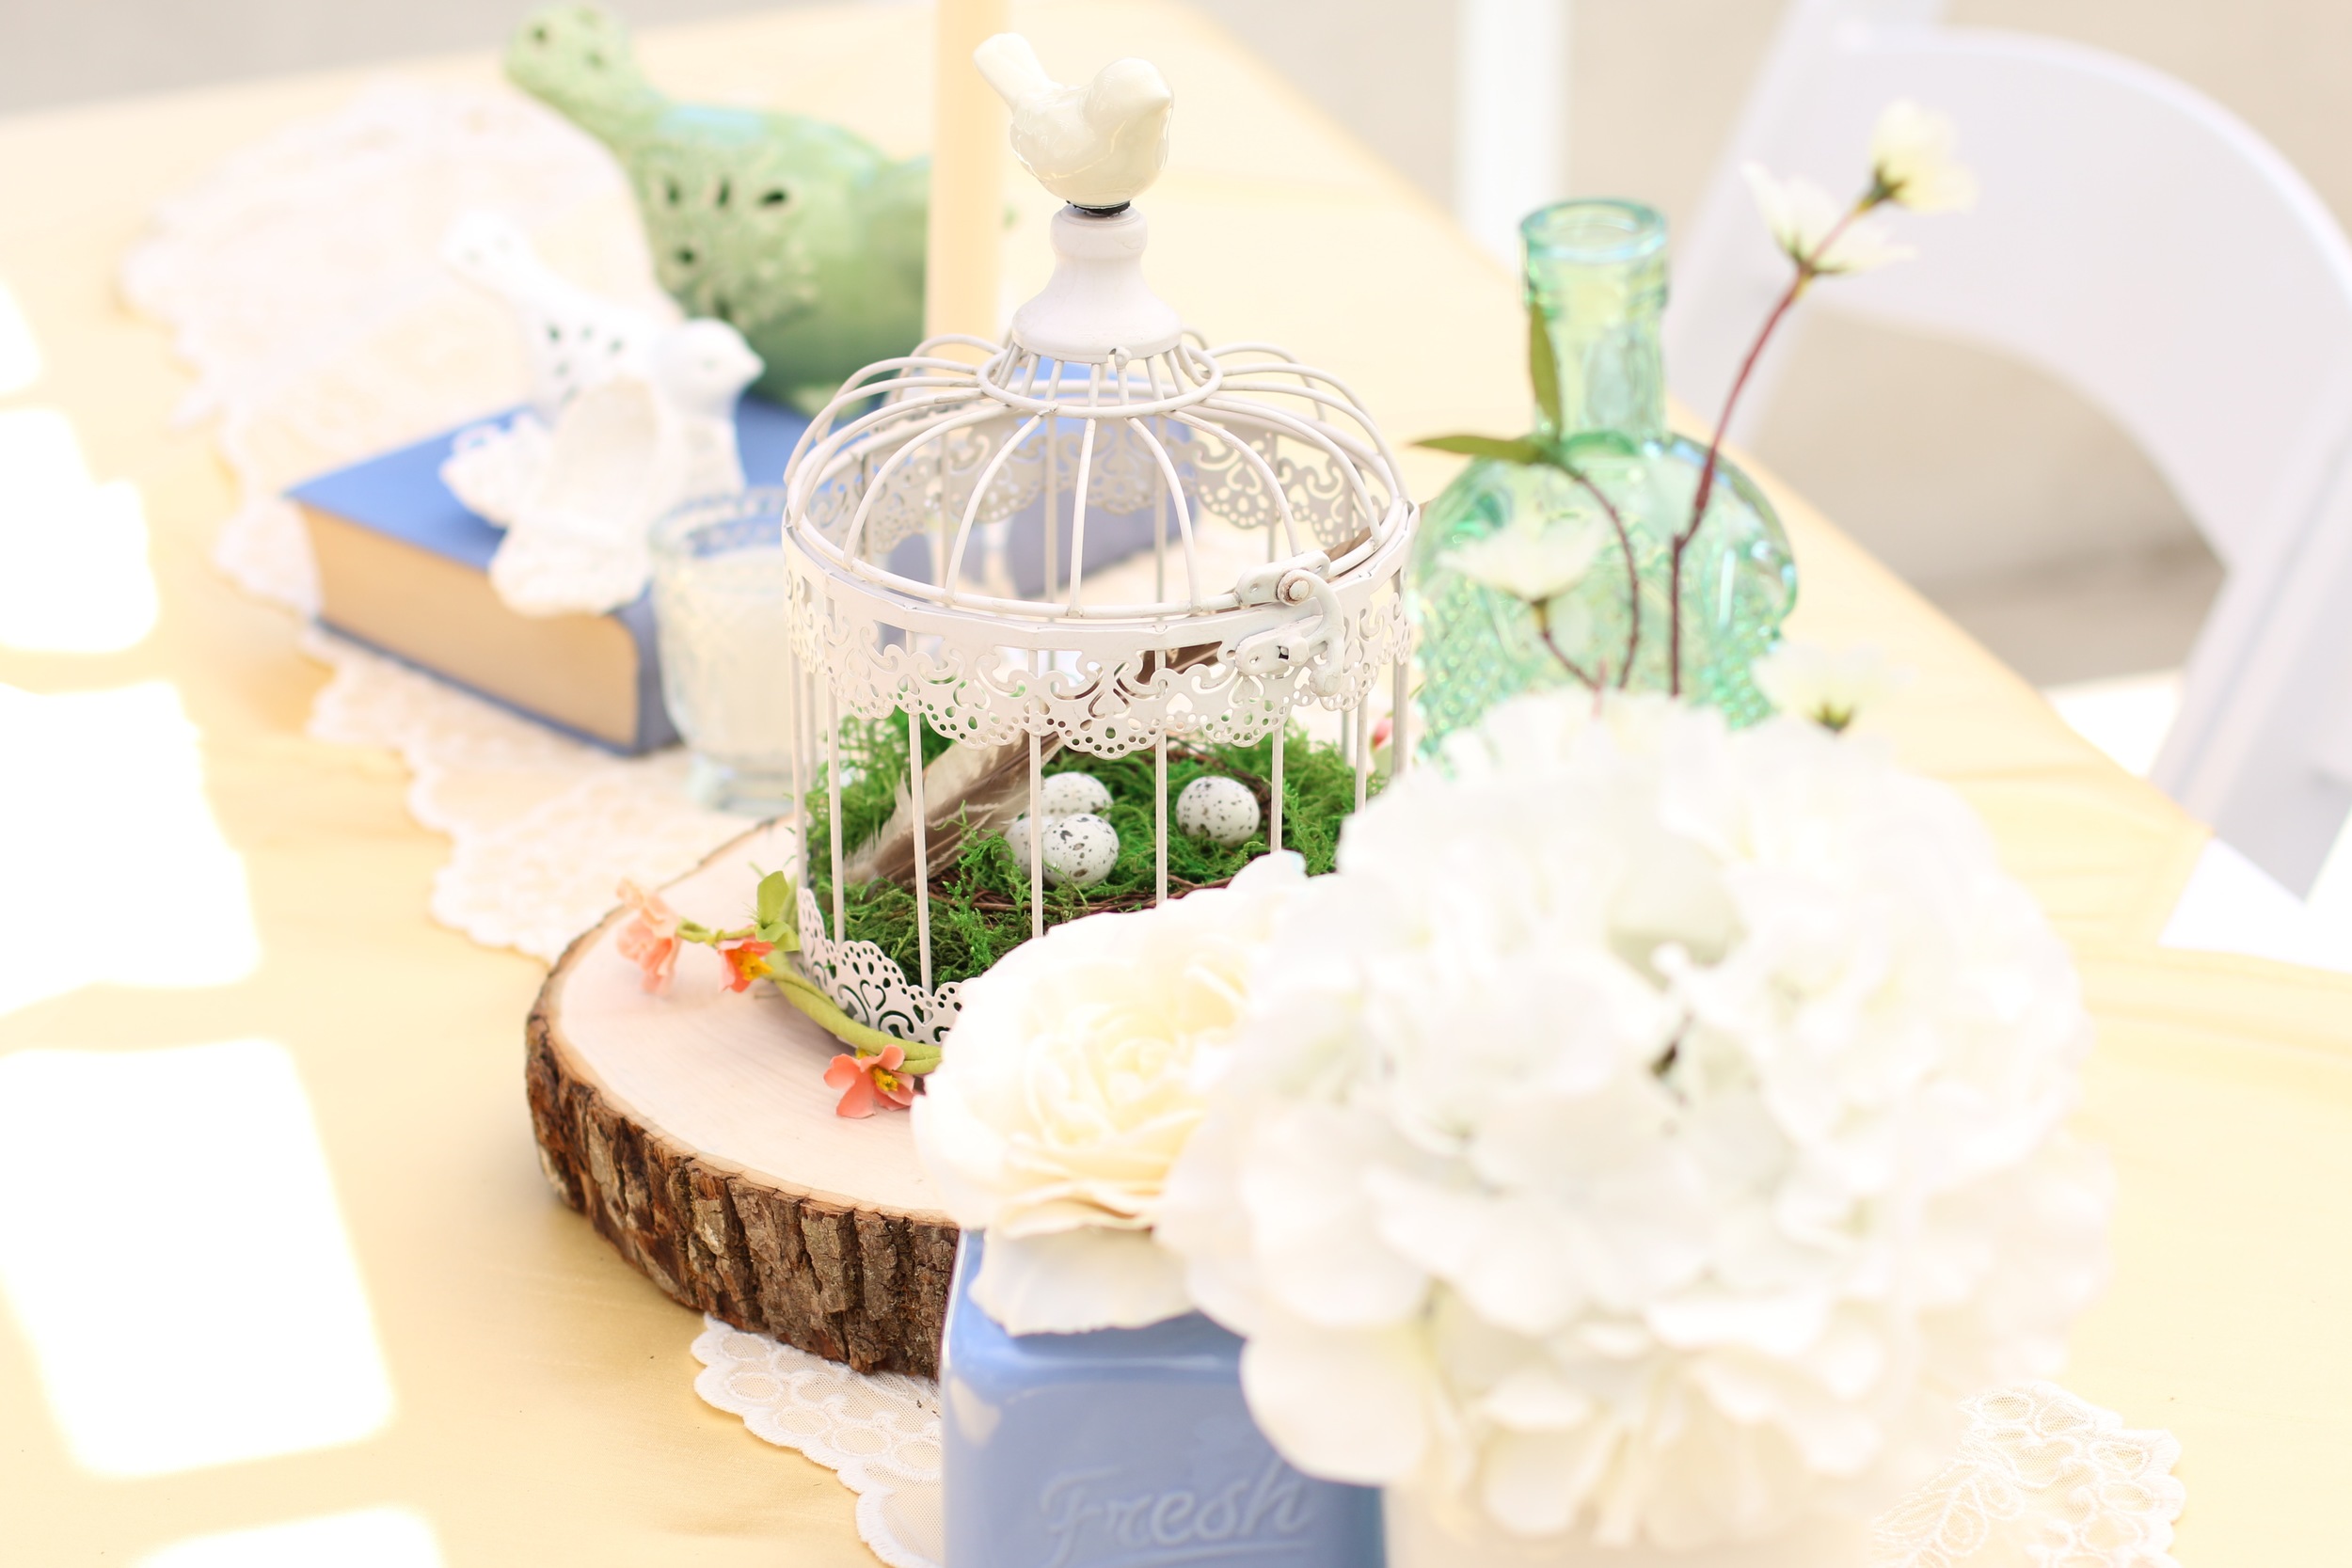 Copy of A Vintage Bird Themed Baby Shower - Ready to Rent from @inJOYtheParty!